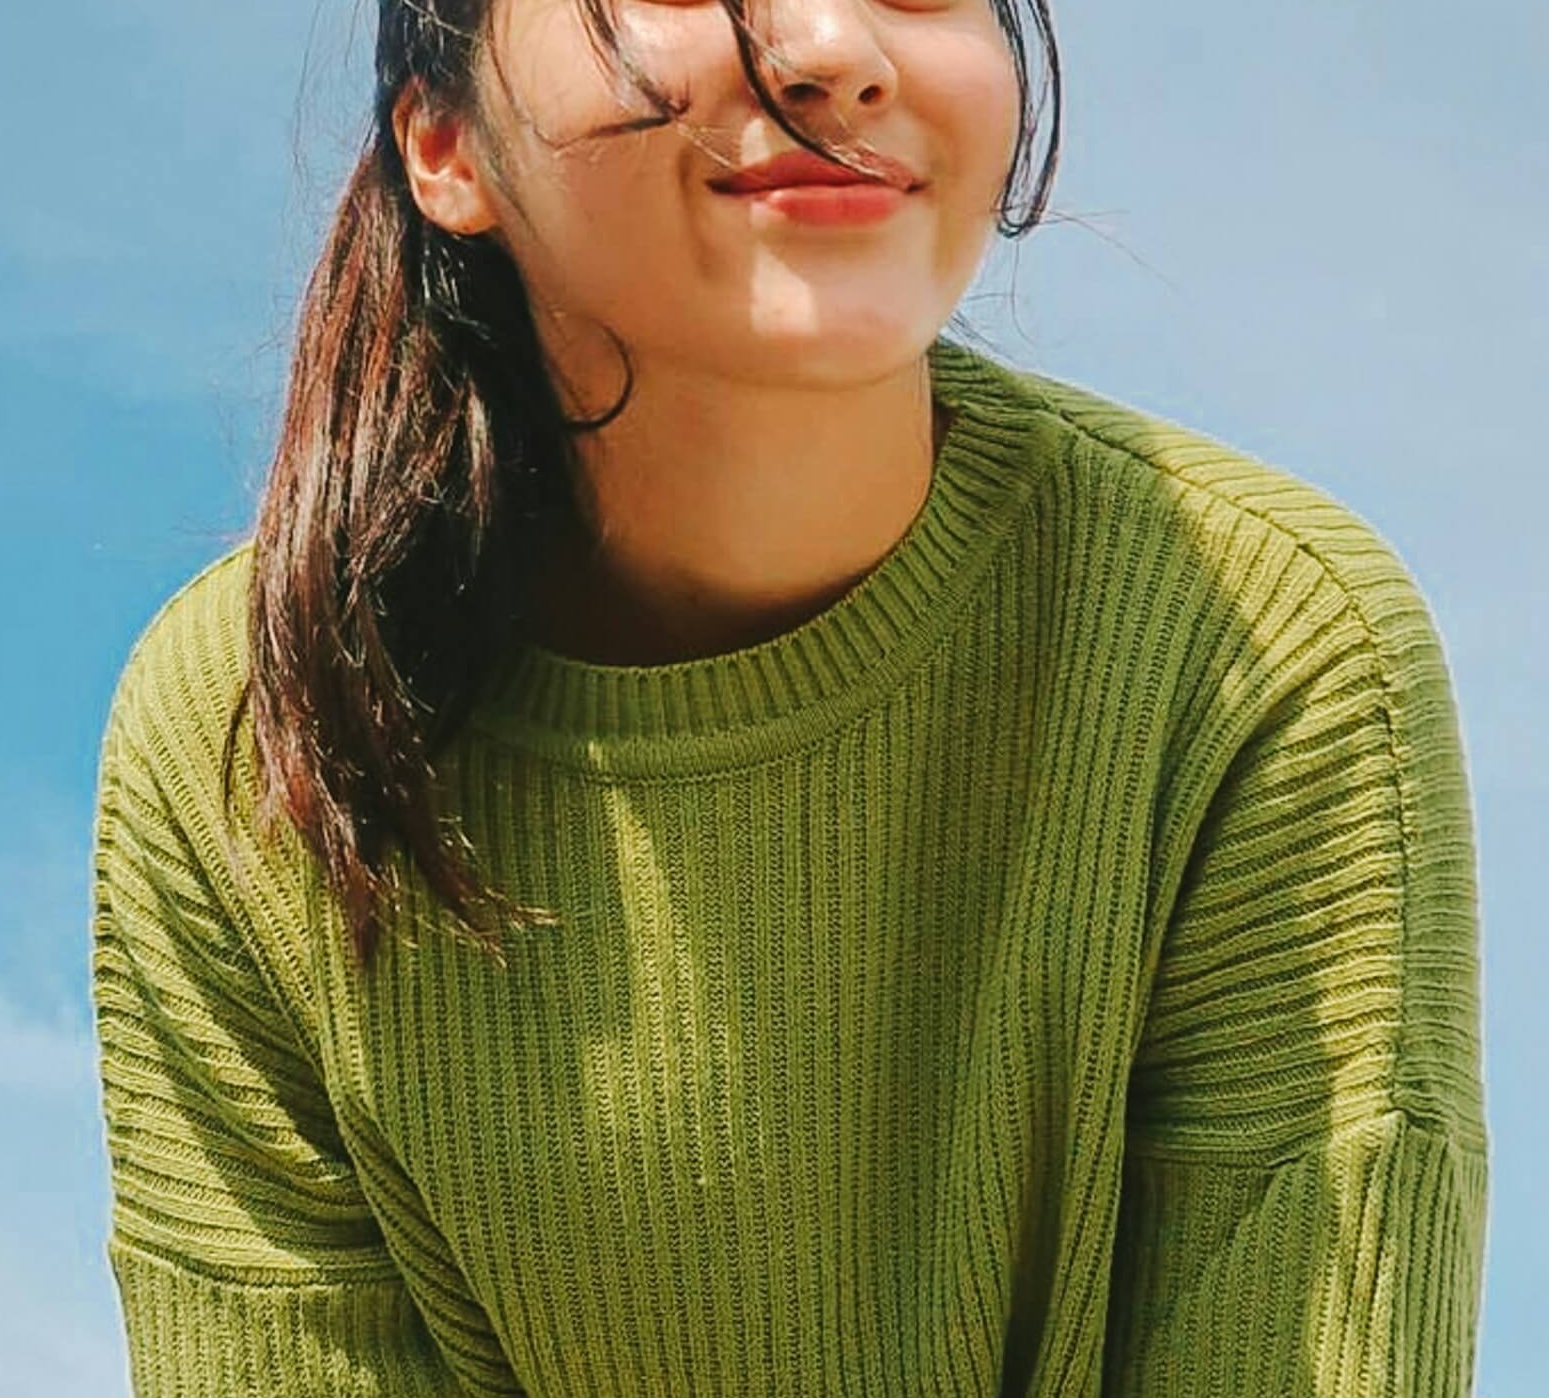 Image of a woman smiling while wearing a green sweater standing outside on a sunny cloudless day. If you struggle to calm yourself as an introvert, learn how online therapy for introverts in Houston, TX can support you.